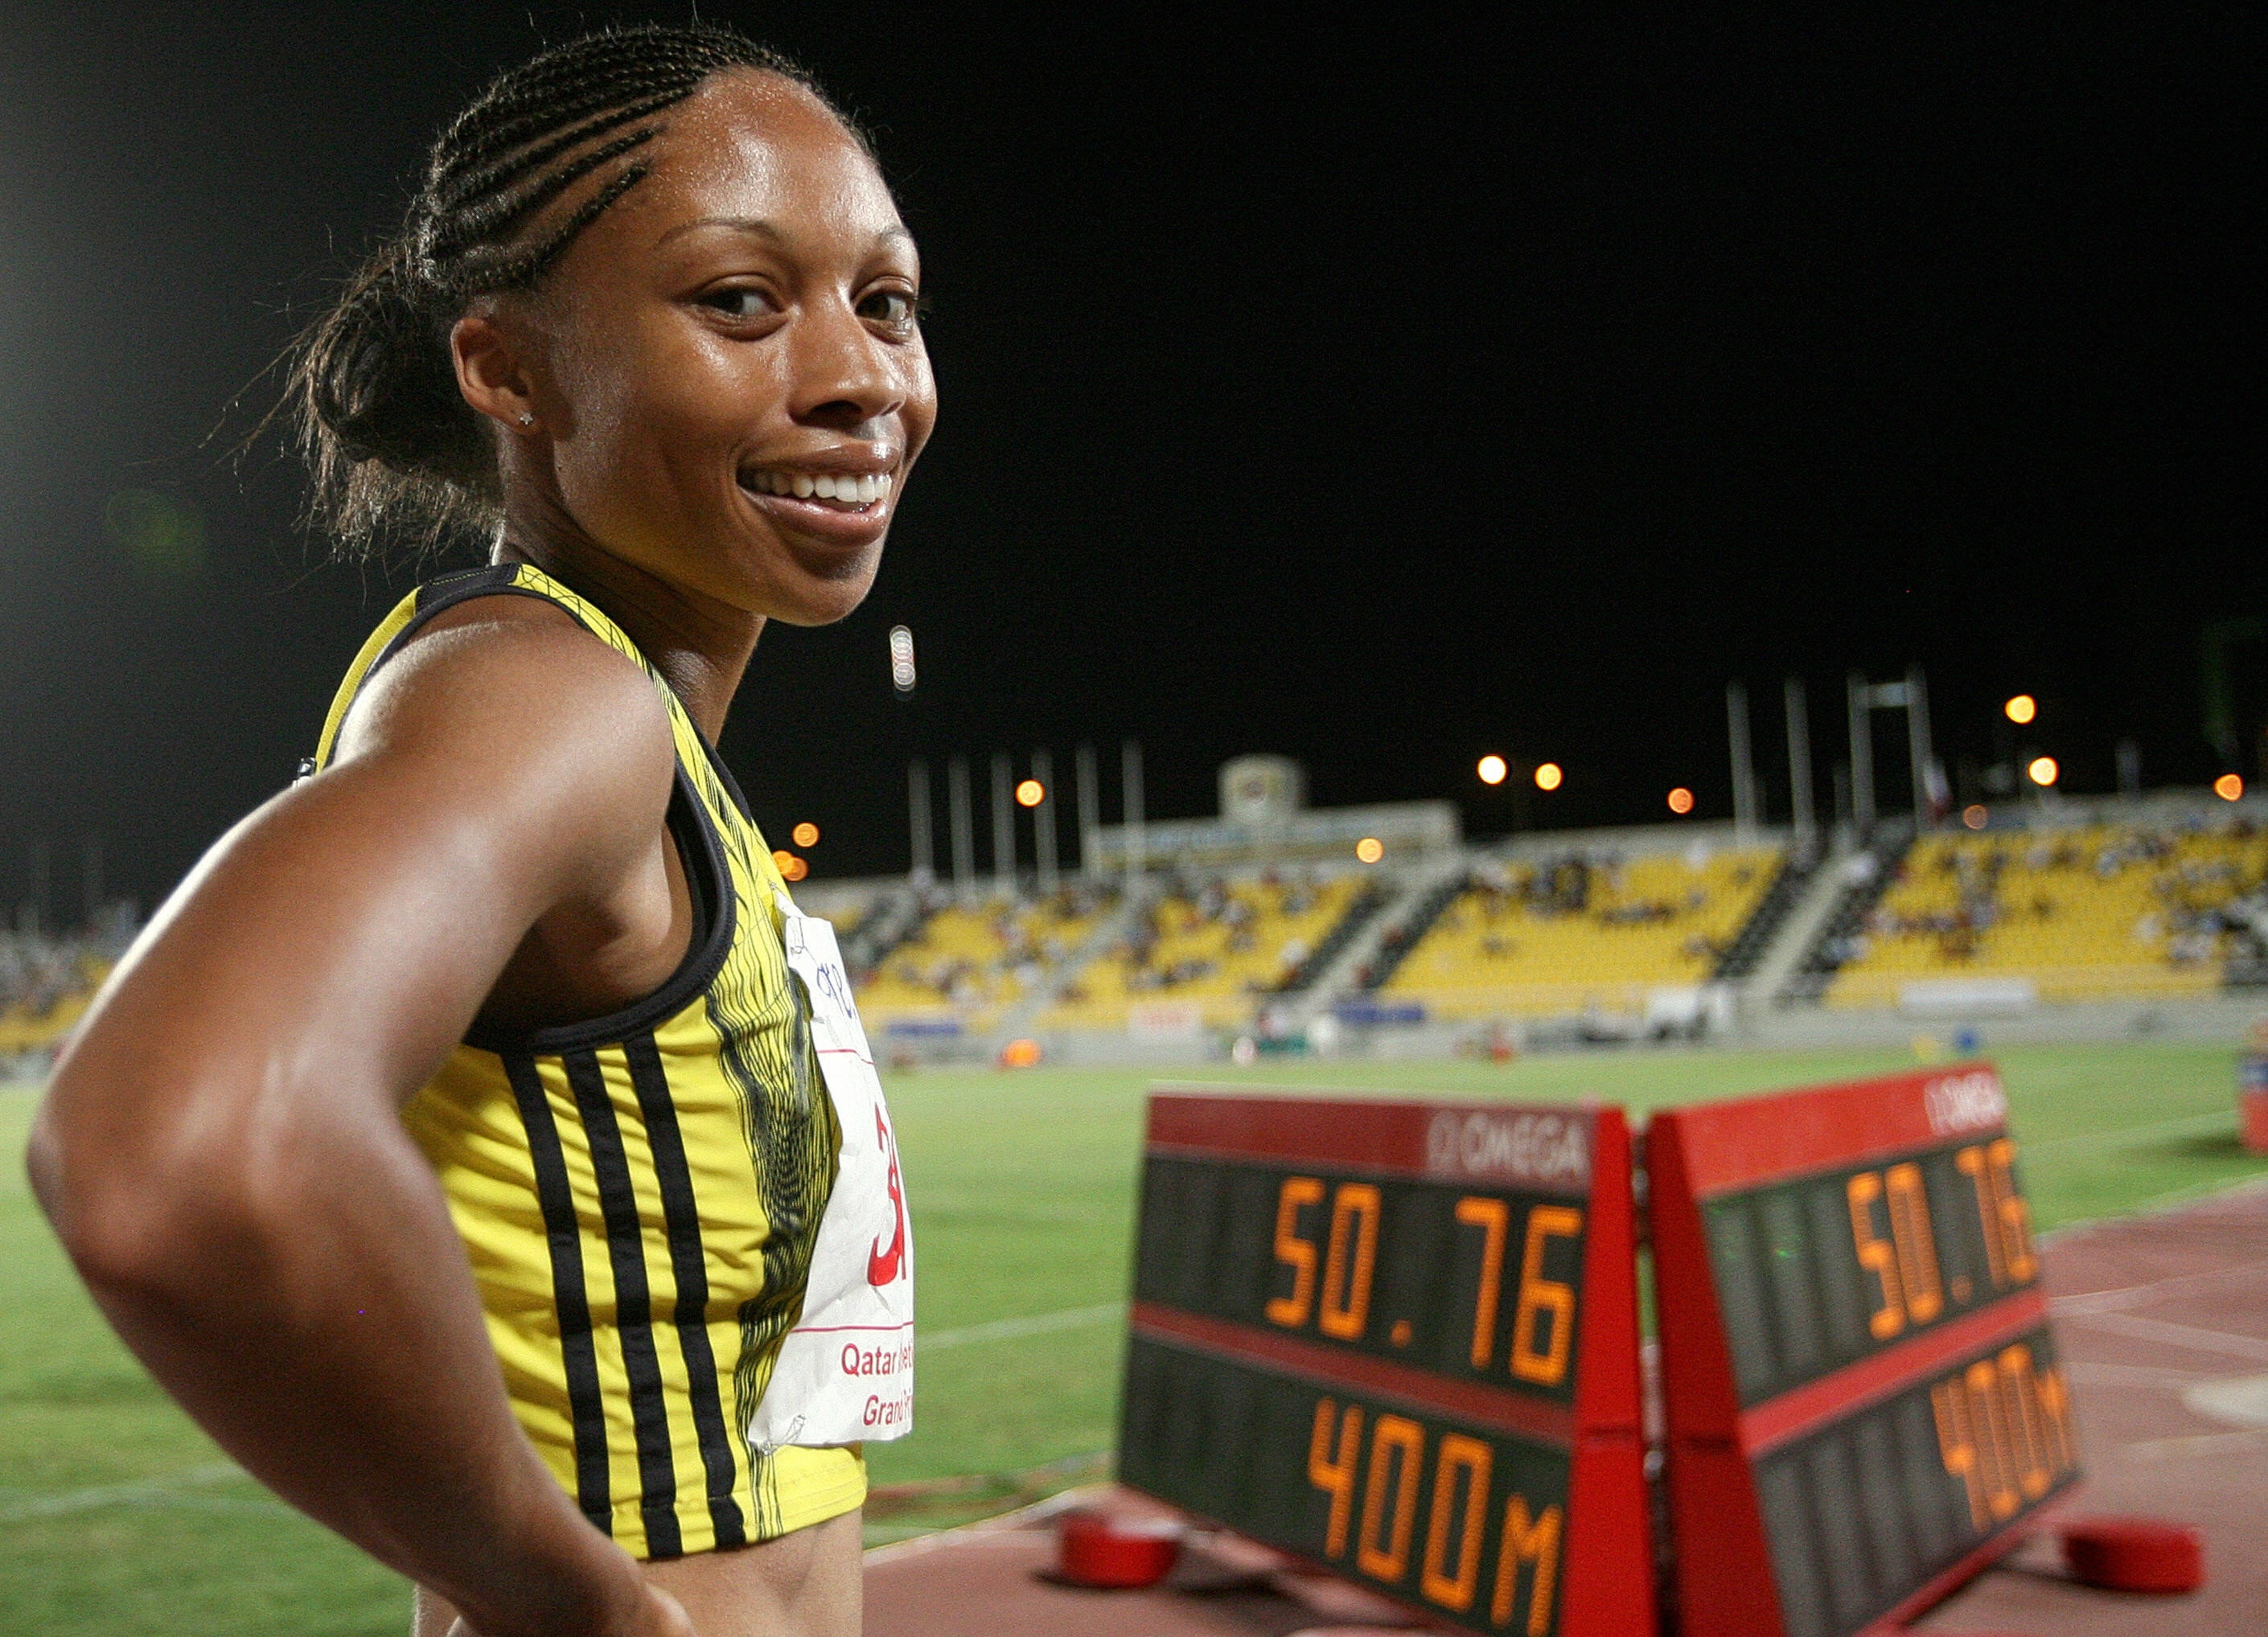 MARWAN NAAMANI/AFP/Getty Images. US two-time Olympic silver medalist and a two-time Athletics World Championship gold medalist Allyson Felix flashes a smile after winning the 400 meters race at the Qatar Super Grand Prix in Doha on May 08,2009. Amantle Montsho from Botswana came seciond and Shericka Williams of Jamaica took third place.